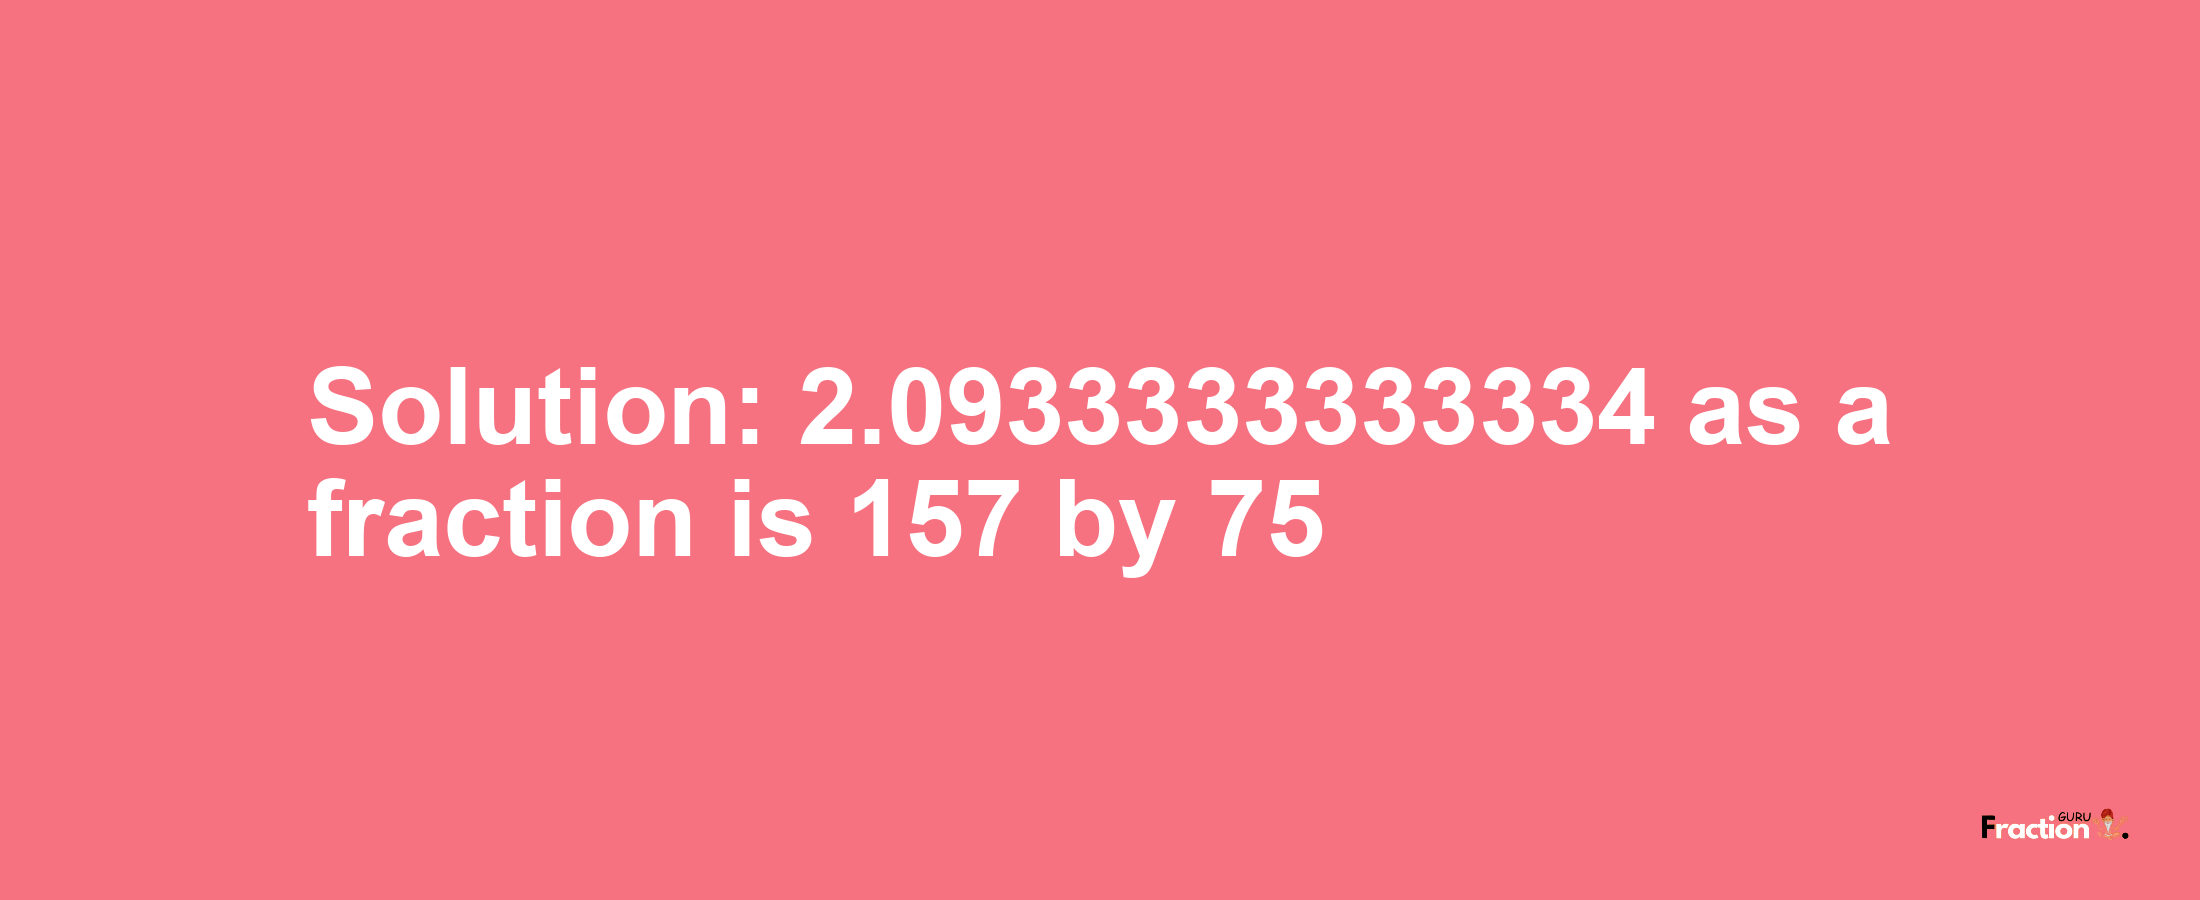 Solution:2.0933333333334 as a fraction is 157/75